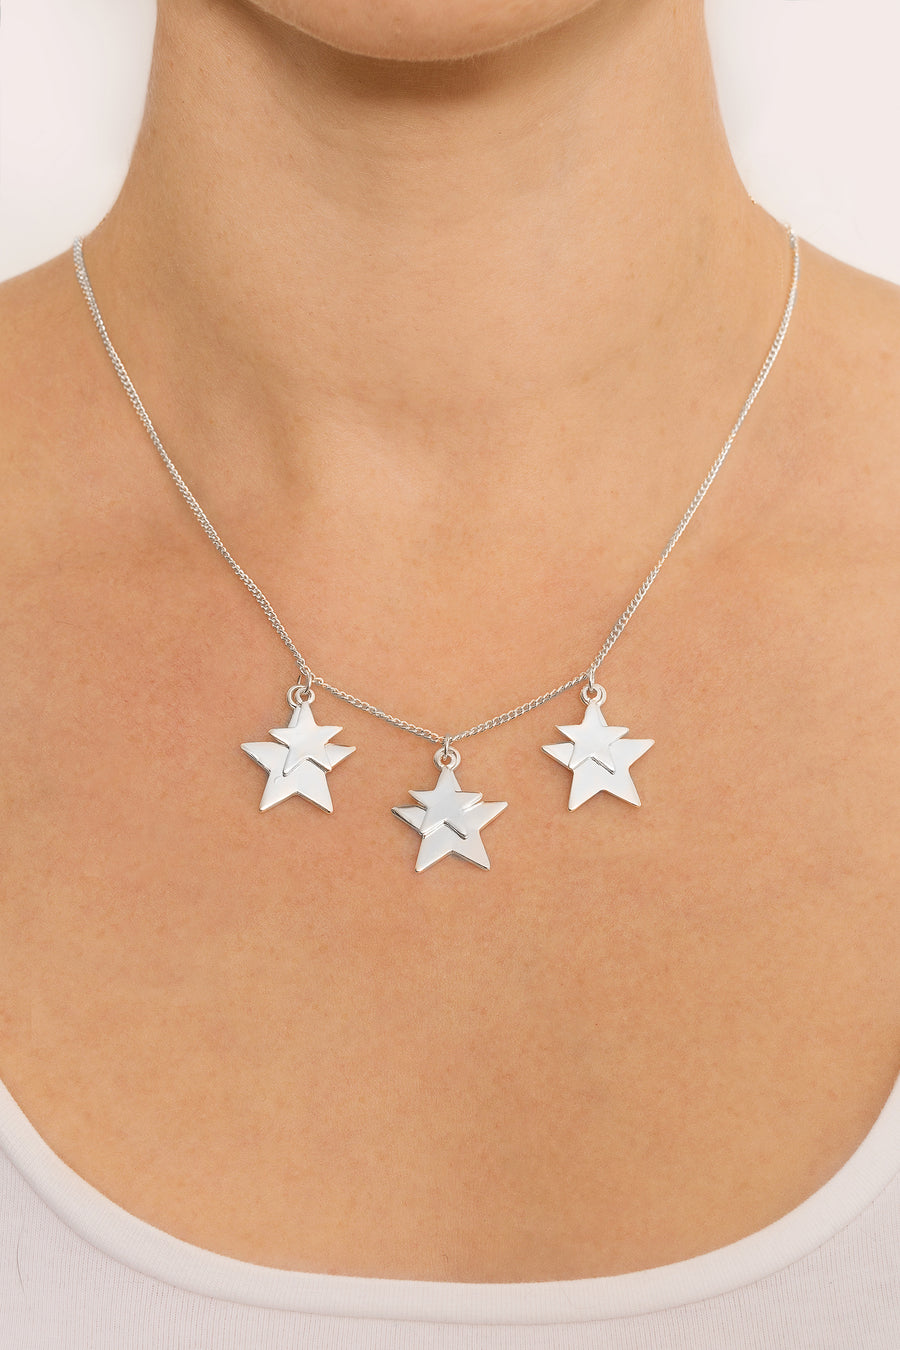 Silver 'Cascading Star' Charm Necklace